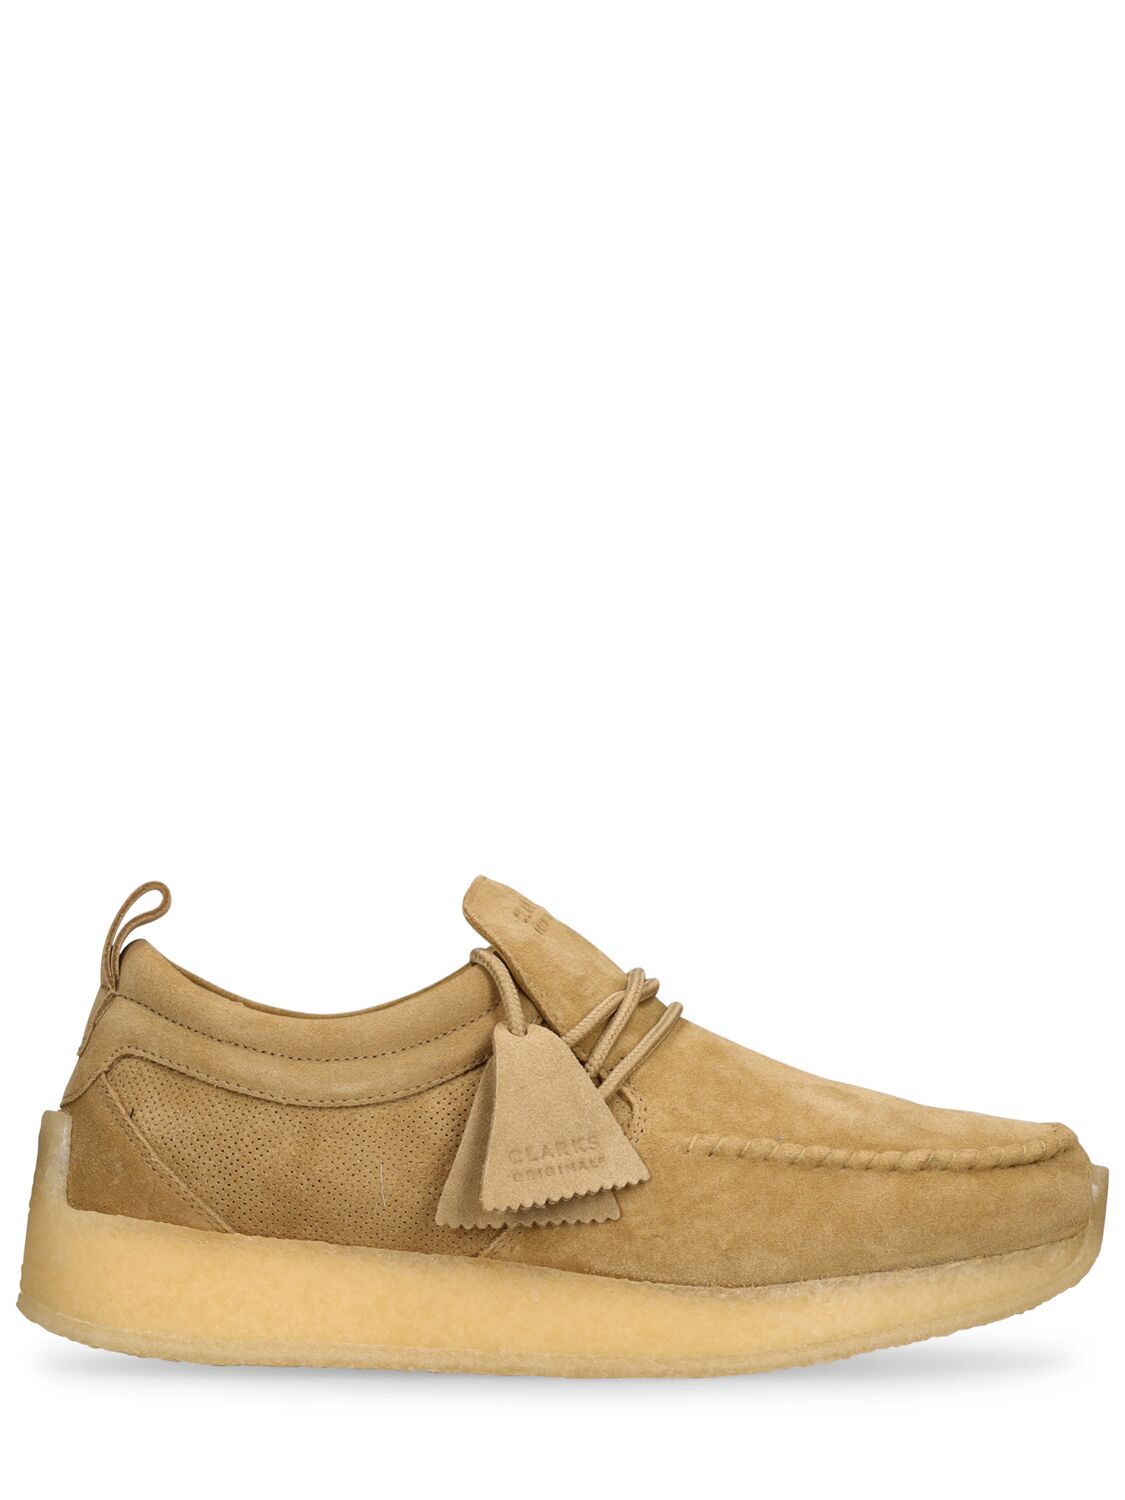 Clarks Originals Maycliffe Suede Lace-up Shoes In Suede Sand